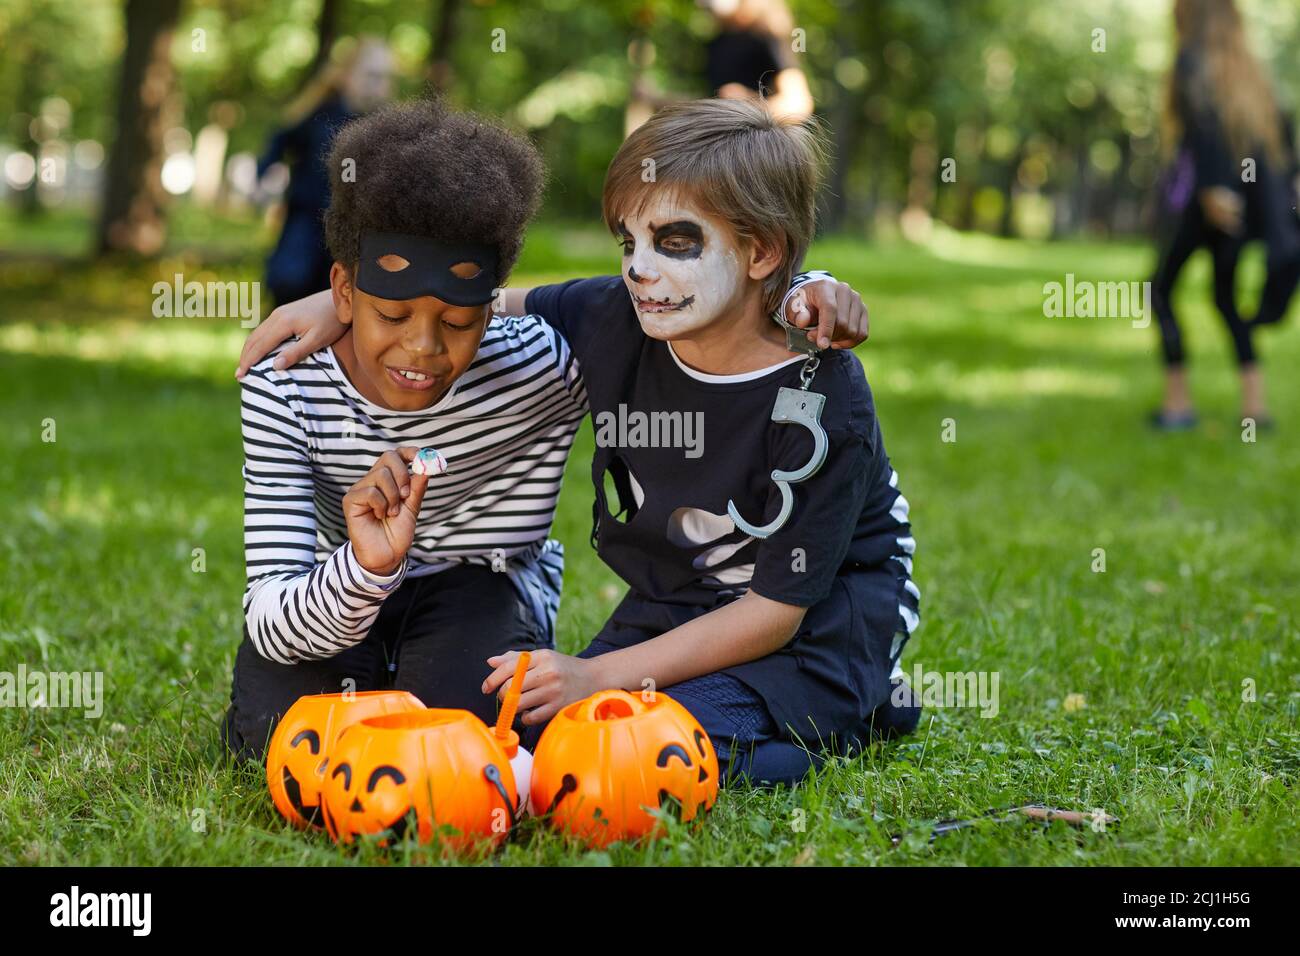 Full length portrait of two boys wearing Halloween costumes sitting on green grass outdoors with candy buckets, copy space Stock Photo